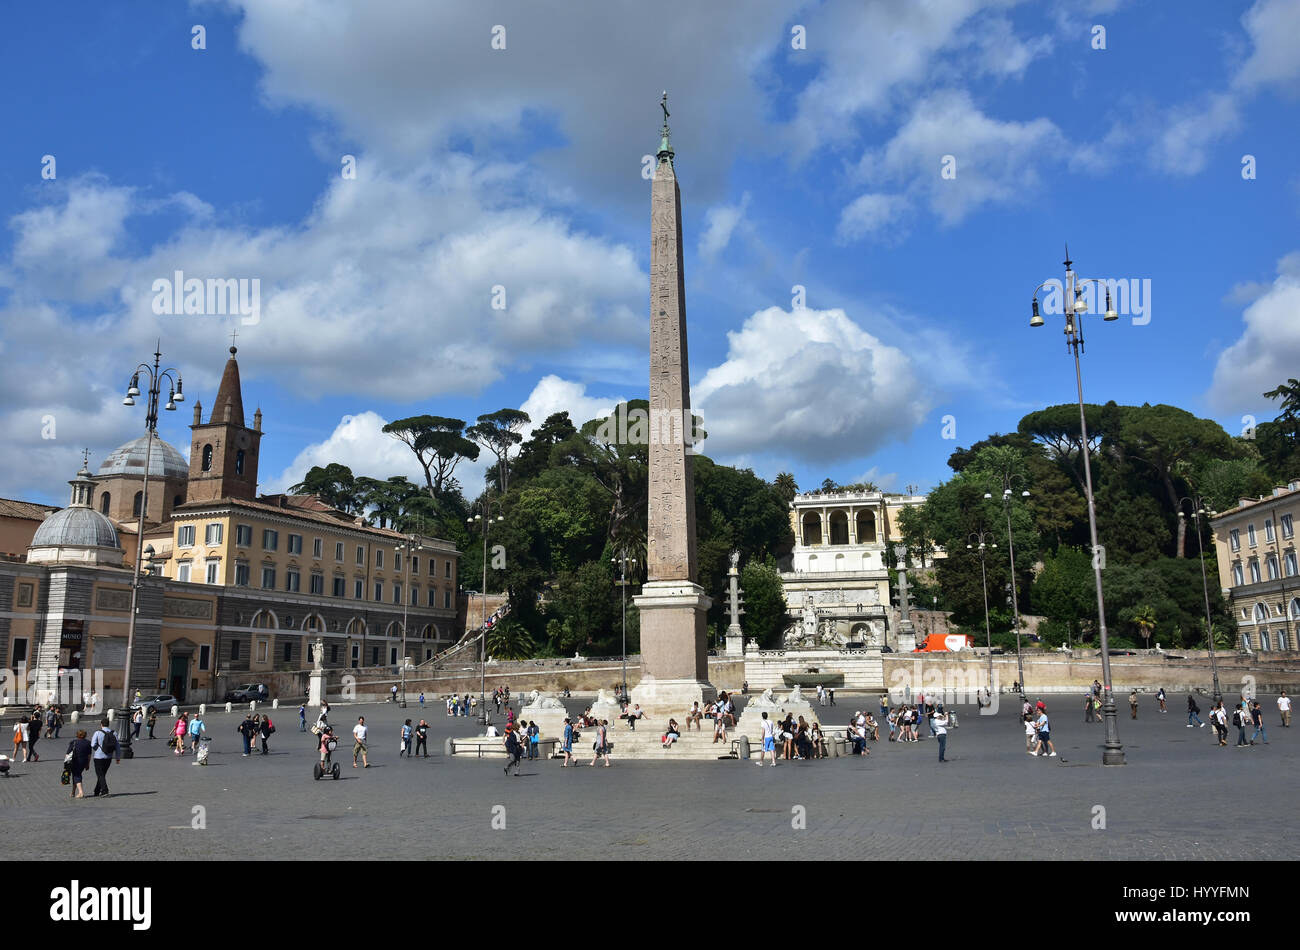 Tourists in the famous Piazza del Popolo (People's Square), in the center of Rome Stock Photo